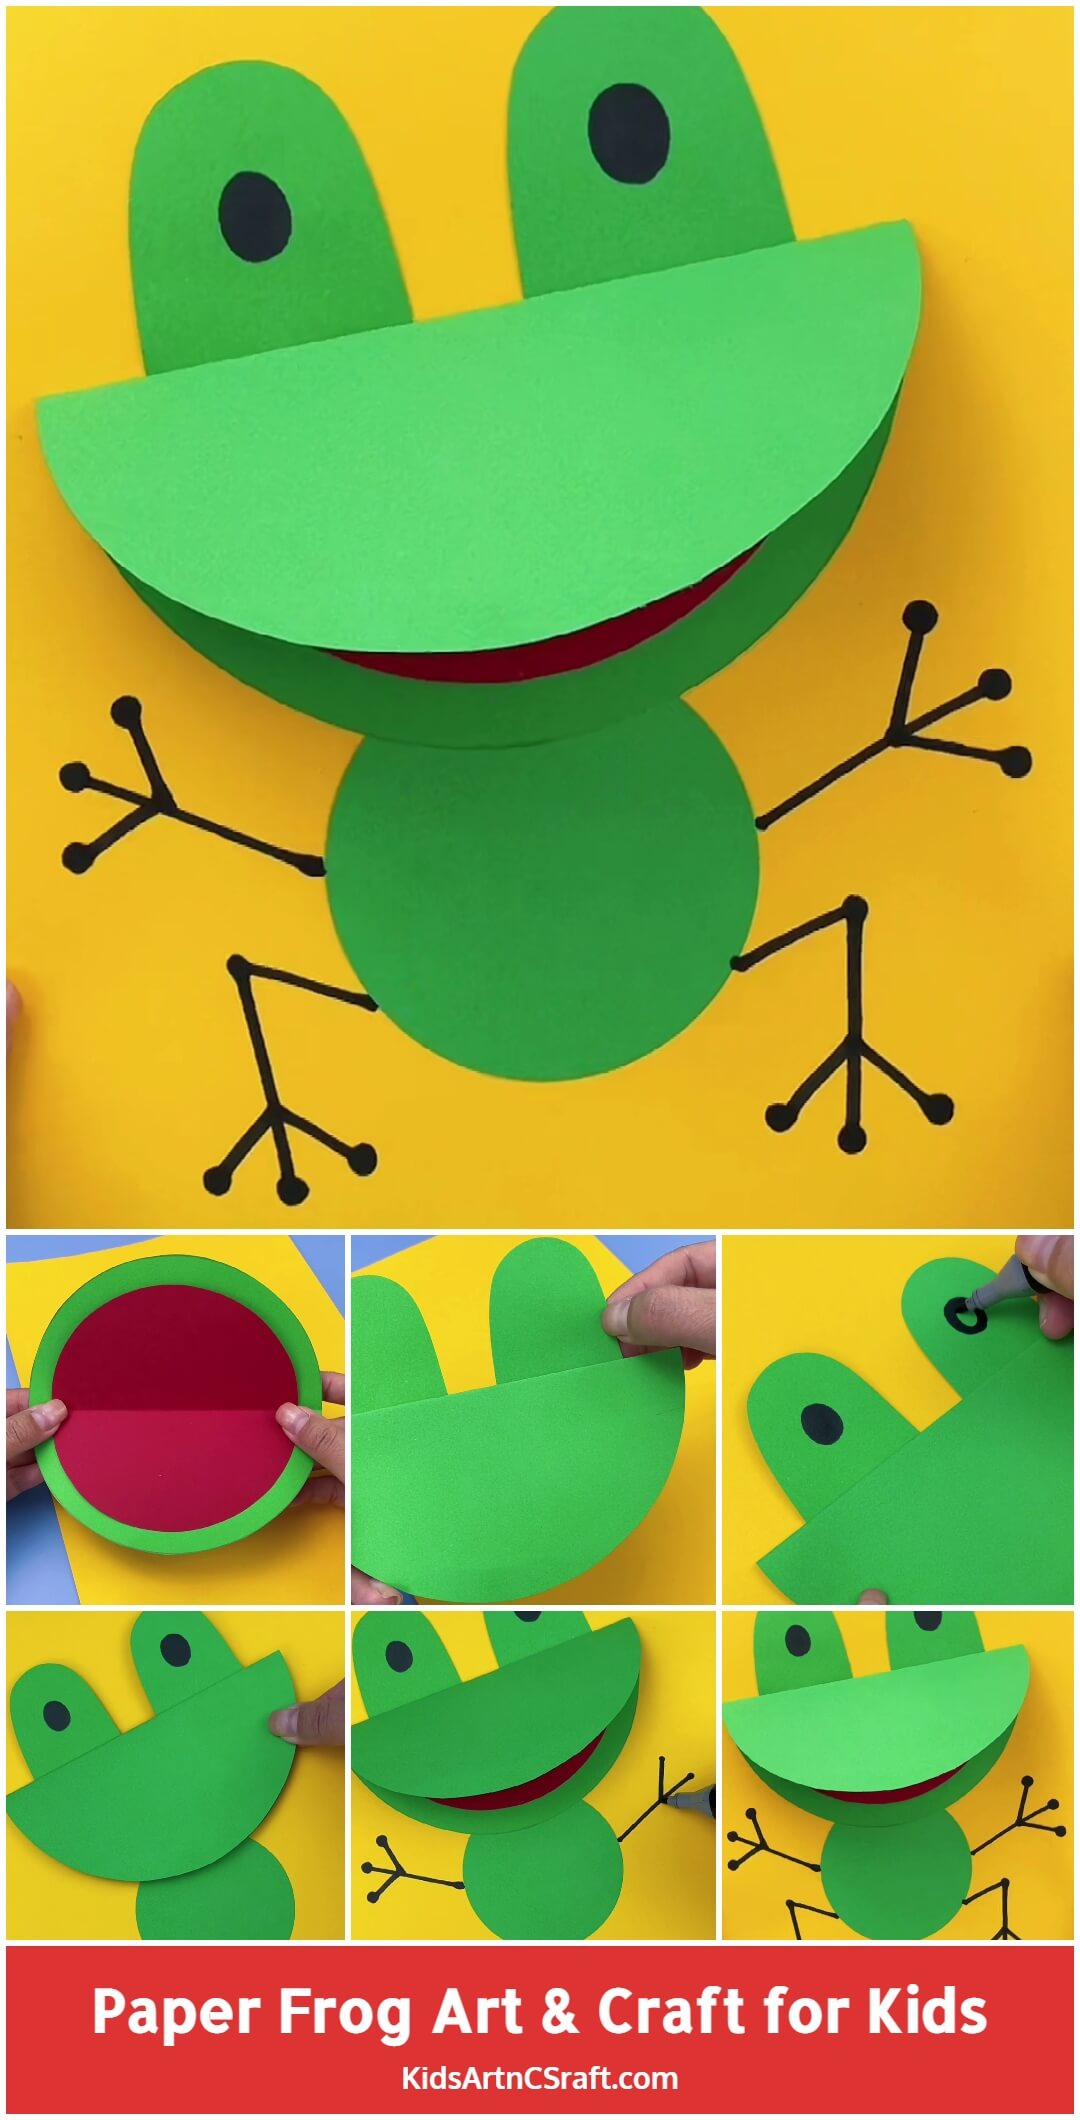 Paper Frog Art & Craft For Kids Step by Step Tutorial